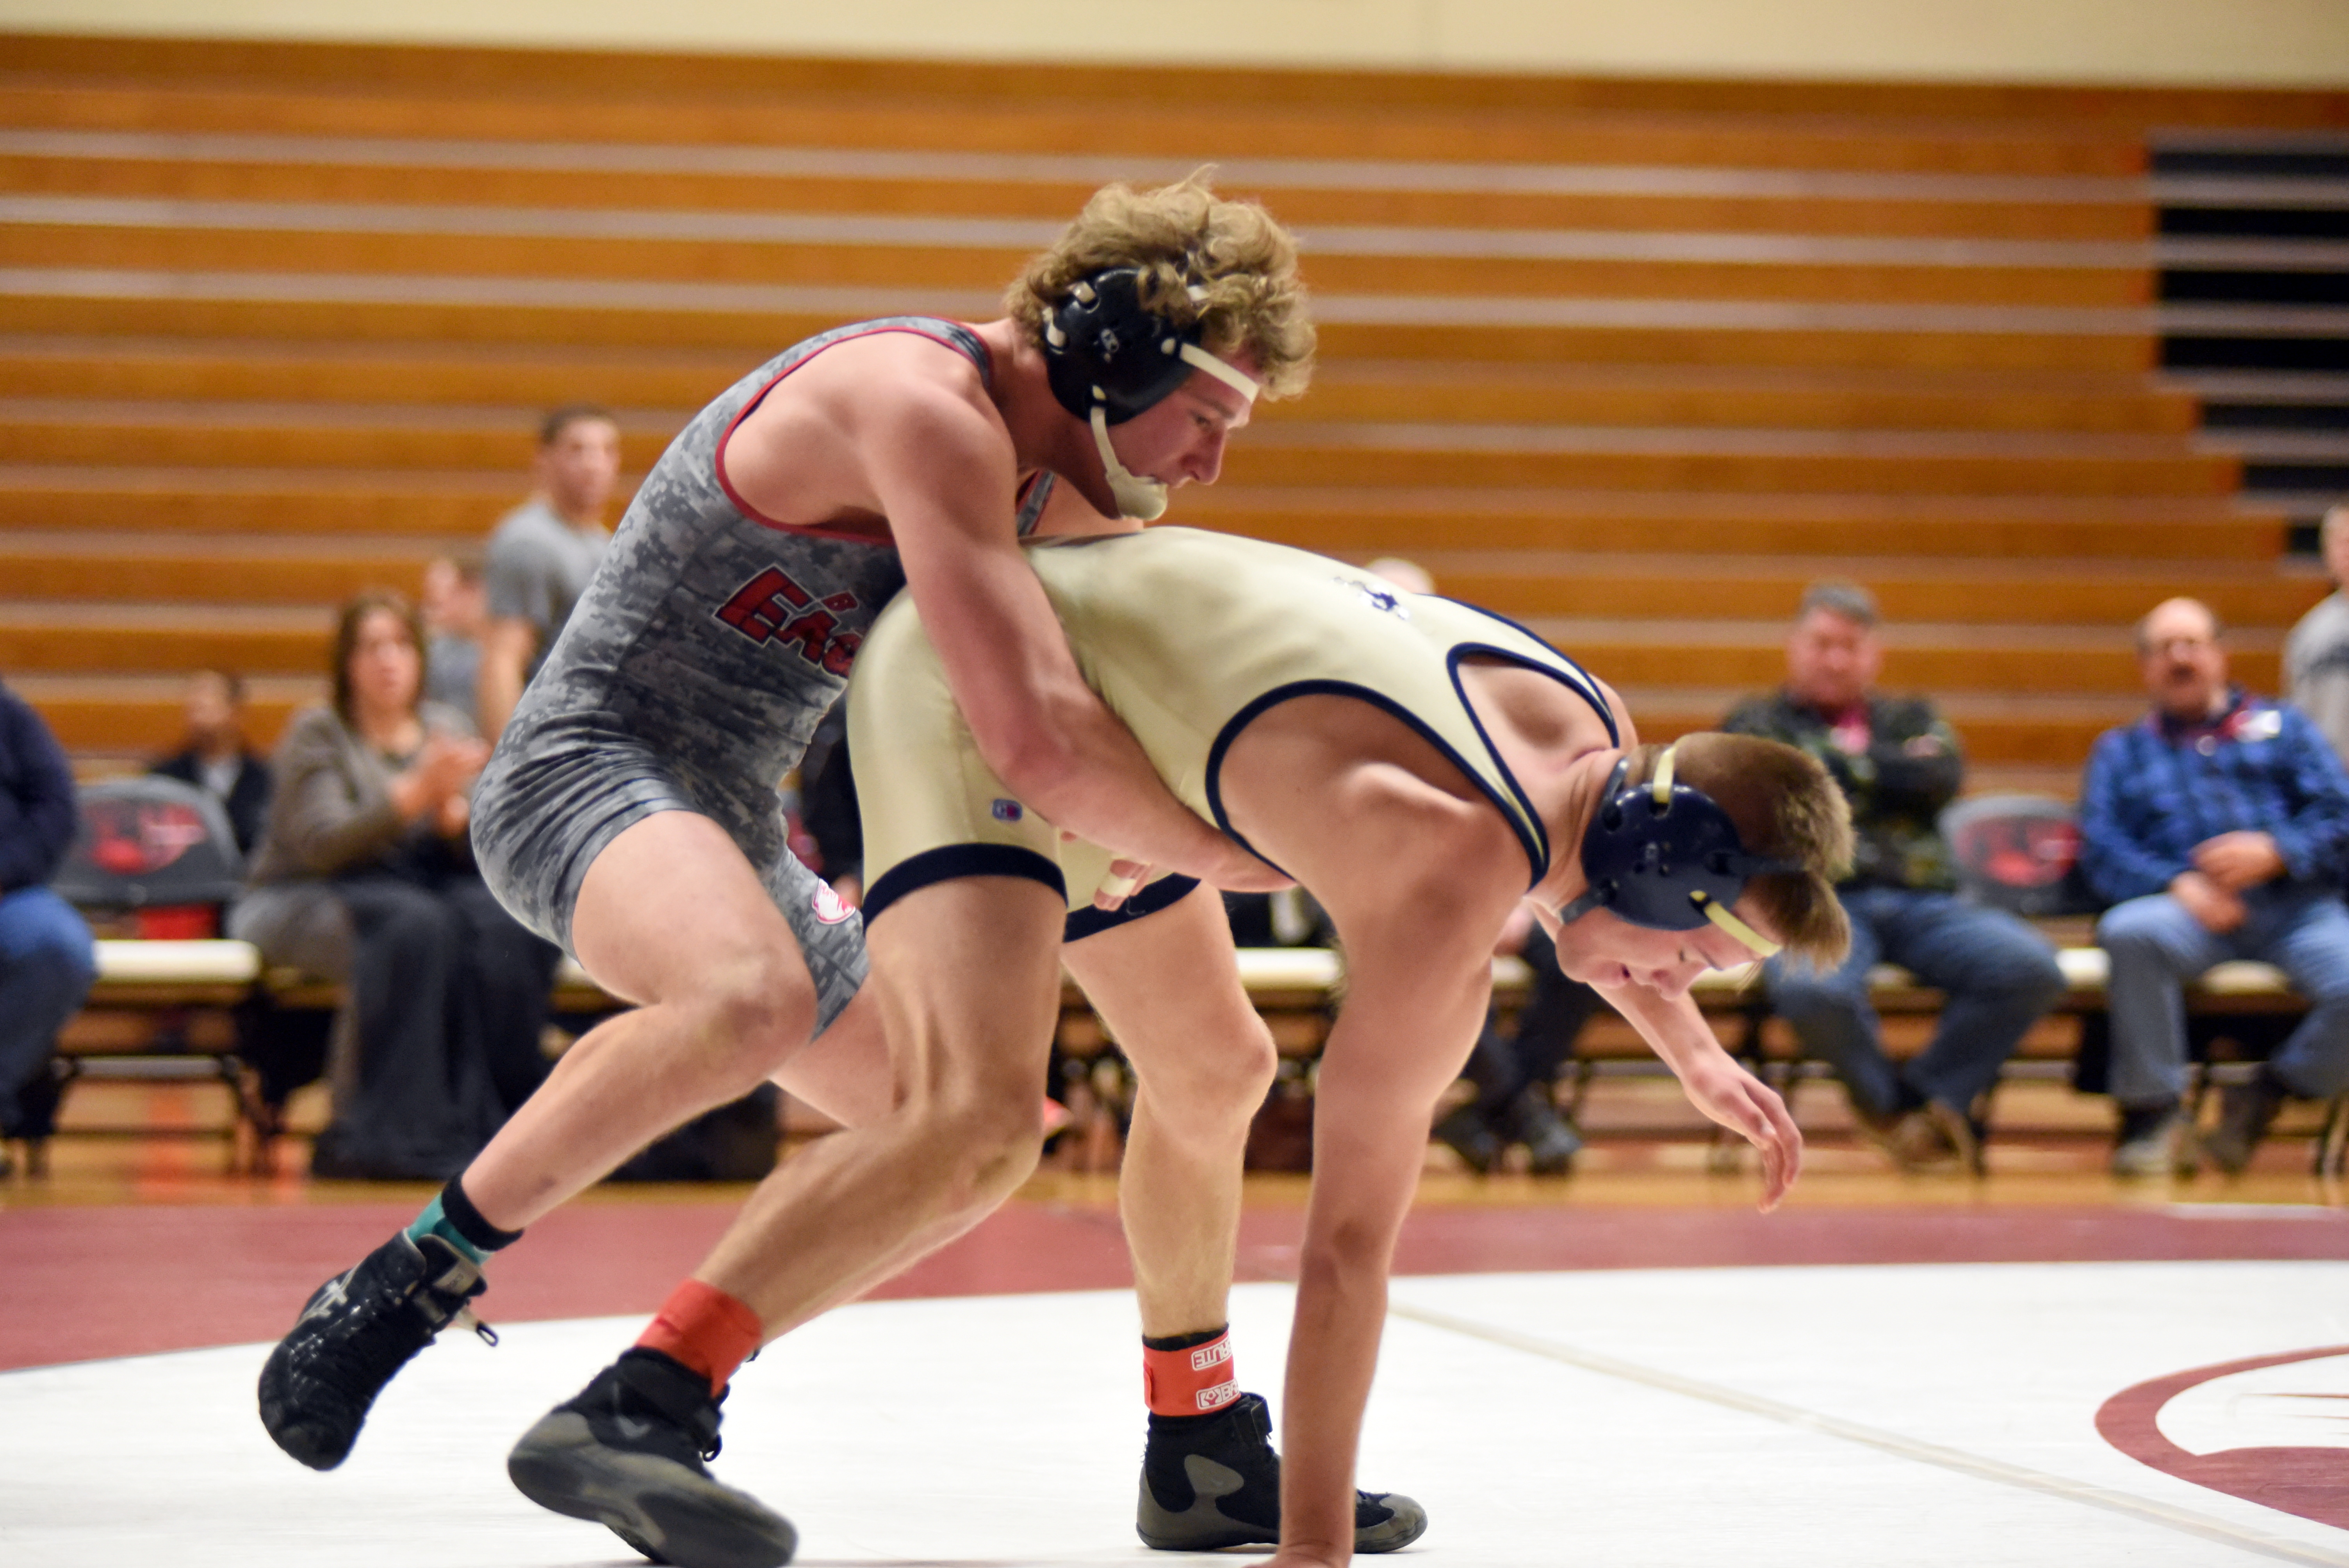 Lock Haven Wrestling blows past Clarion University, 27-12 | News ...